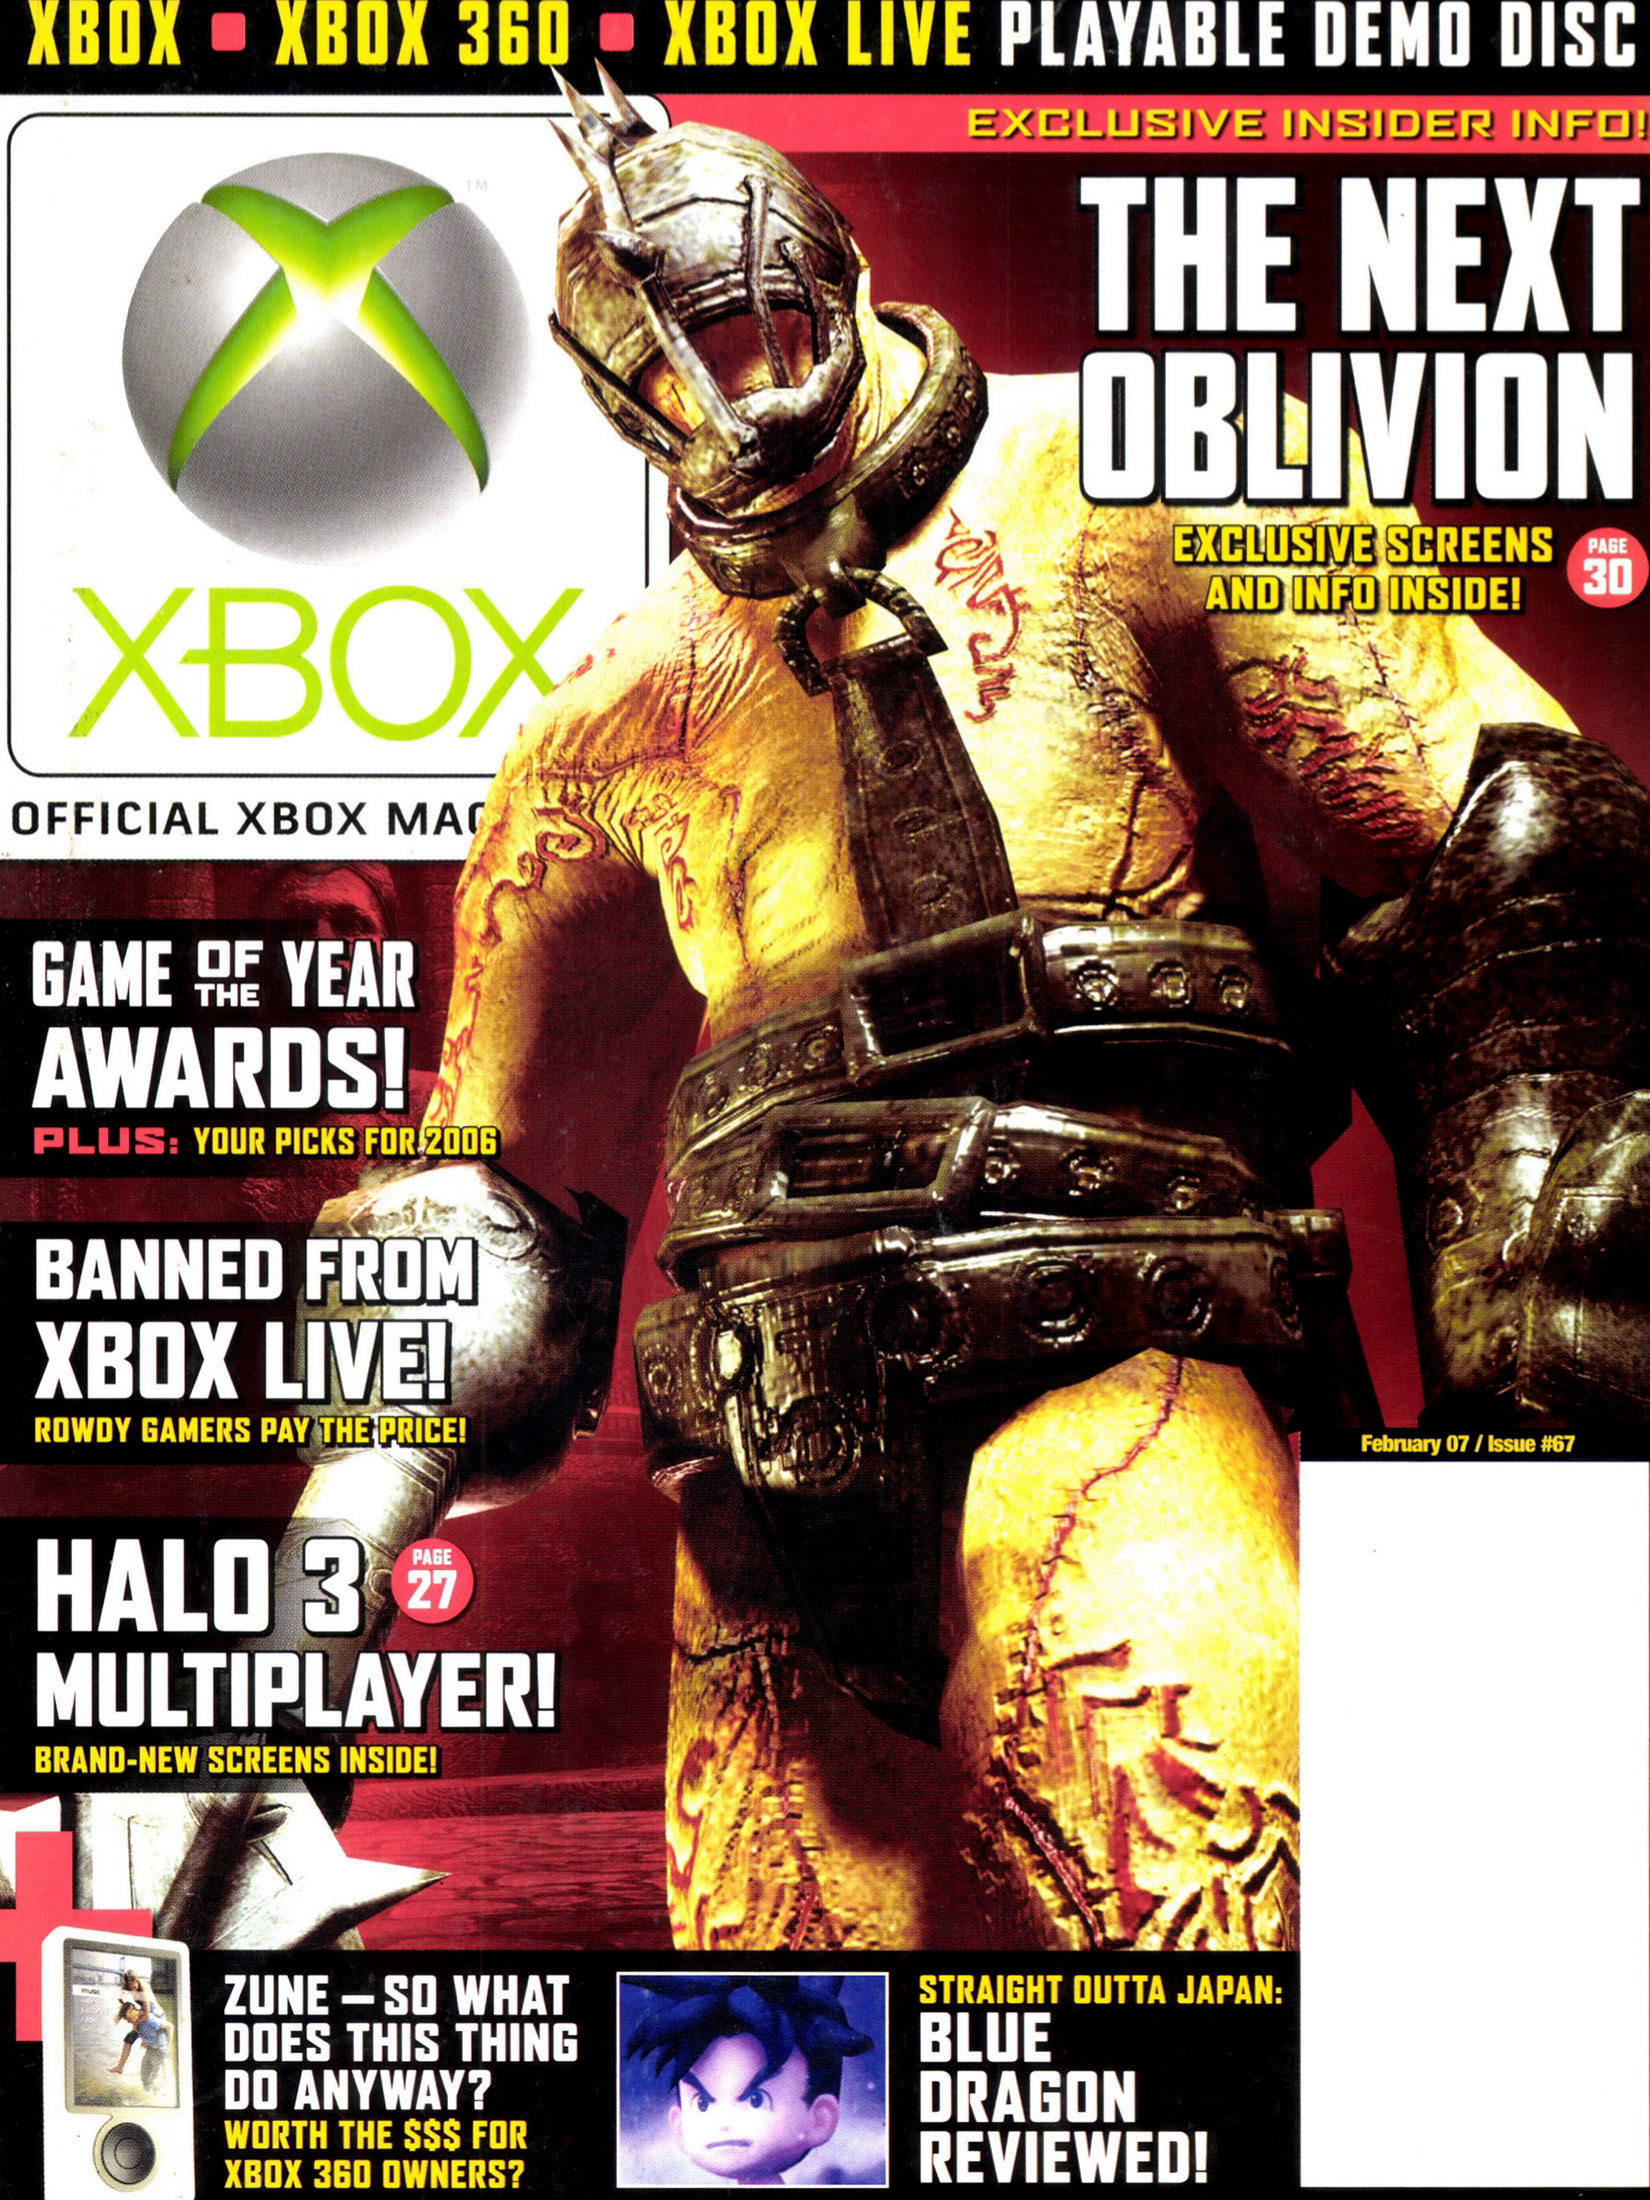 Official Xbox Magazine Issue 067 (February 2007)